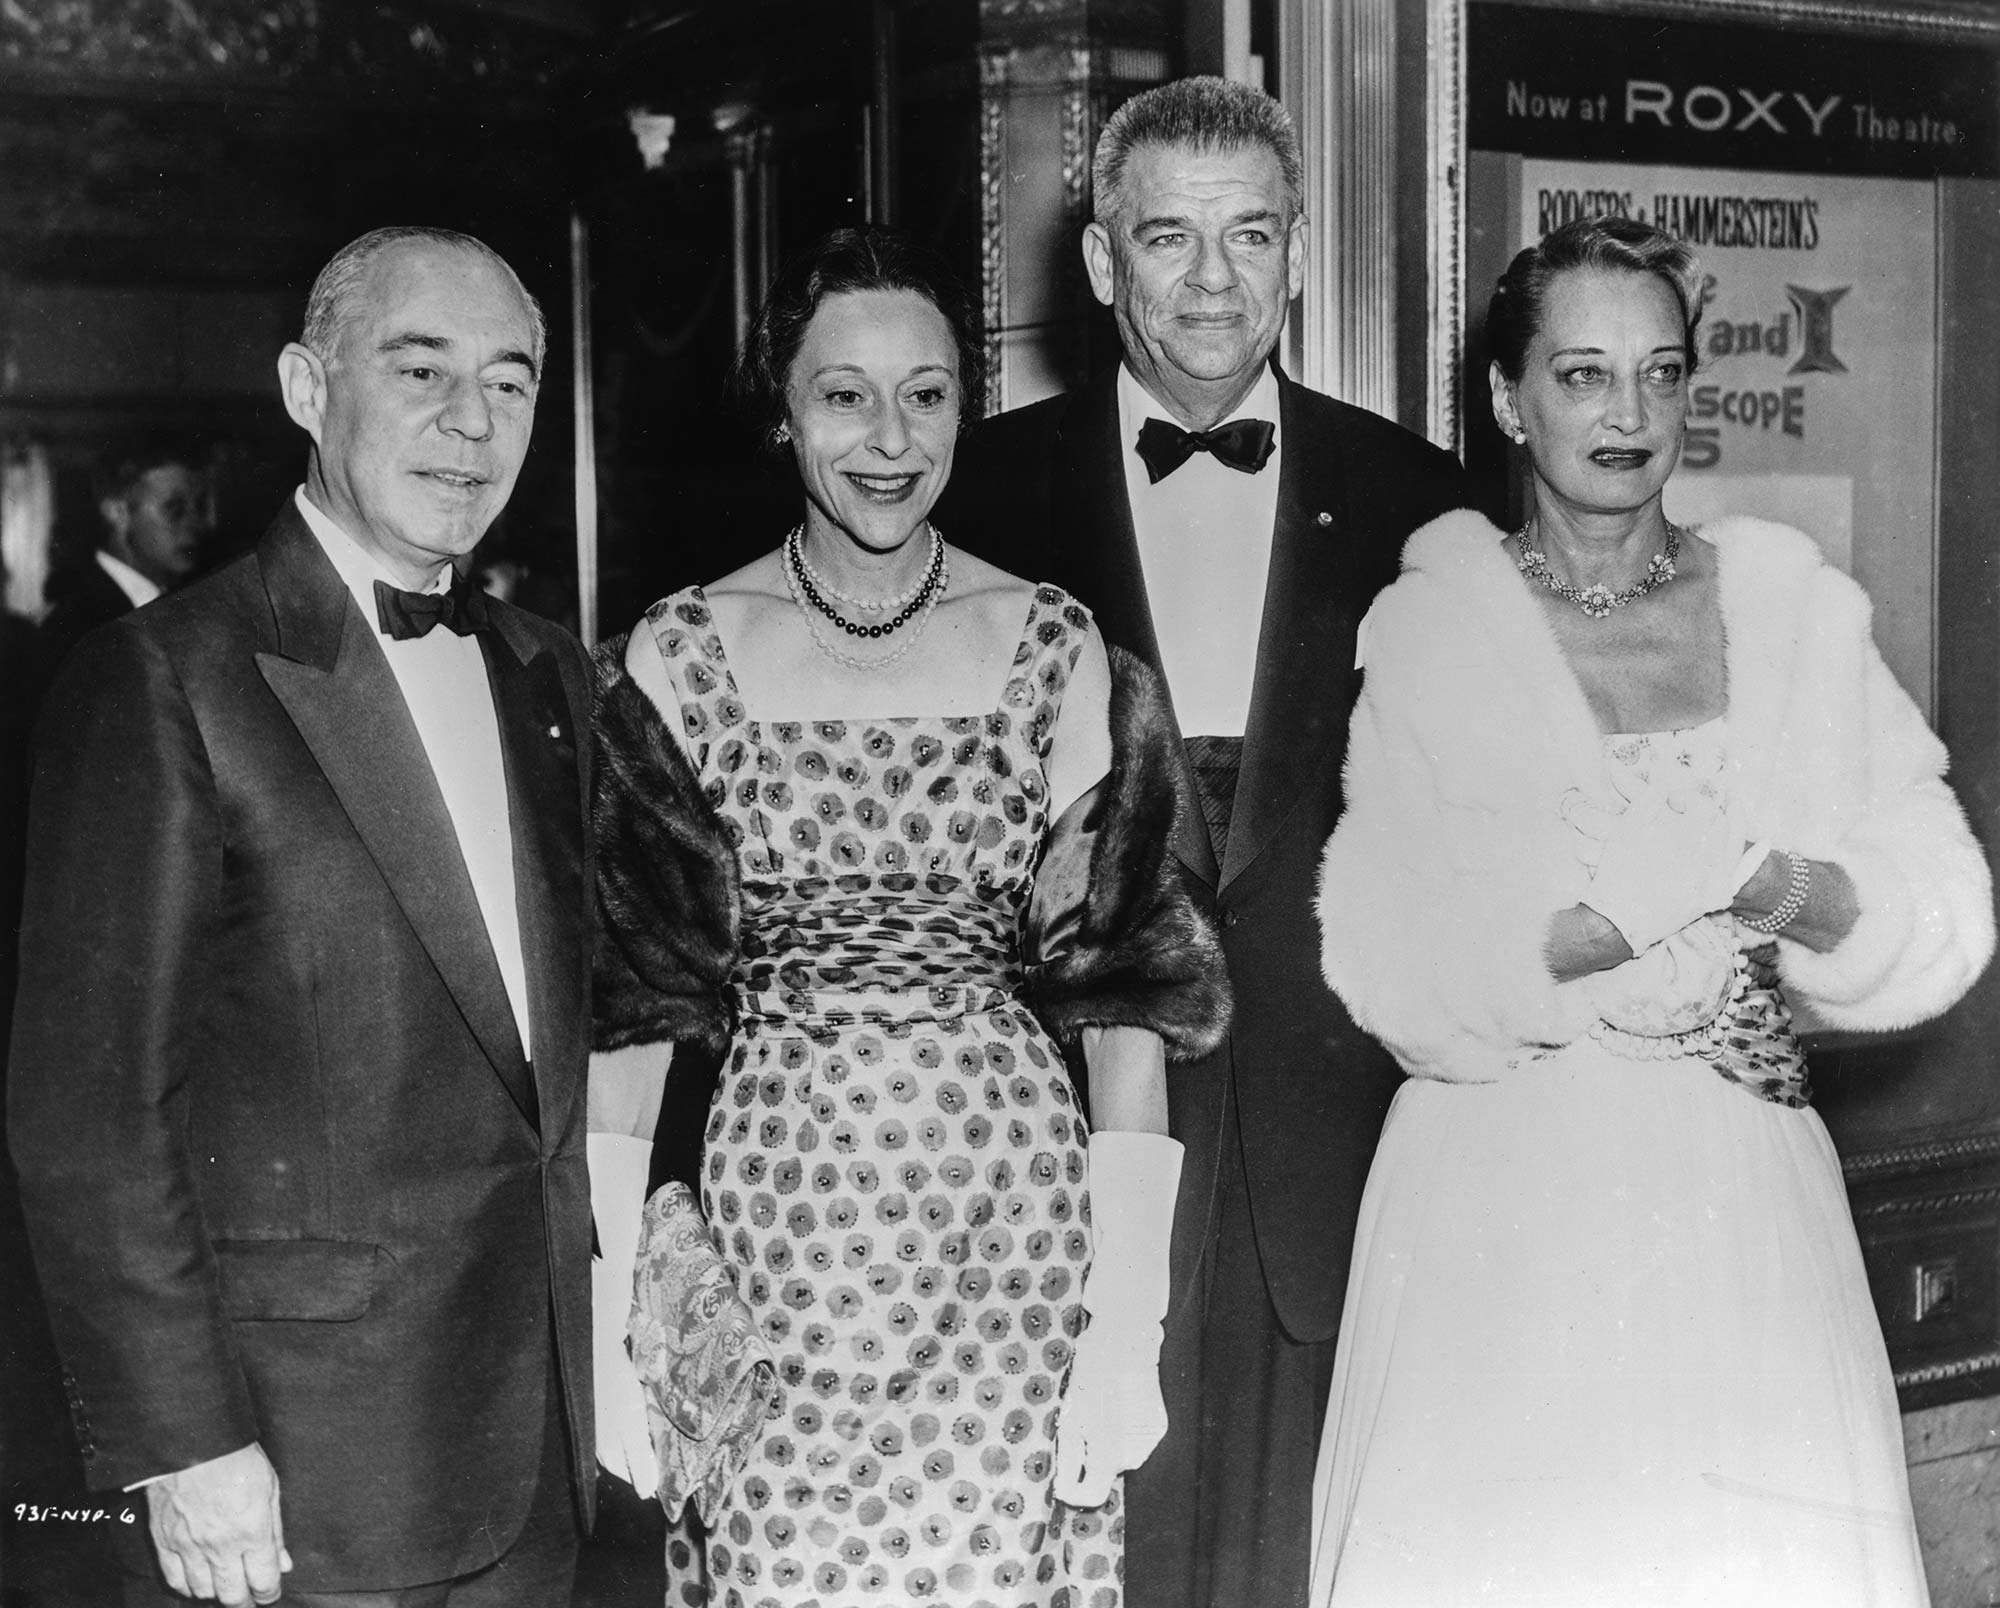 A film premiere photo for the 1956 film version of The King and I.